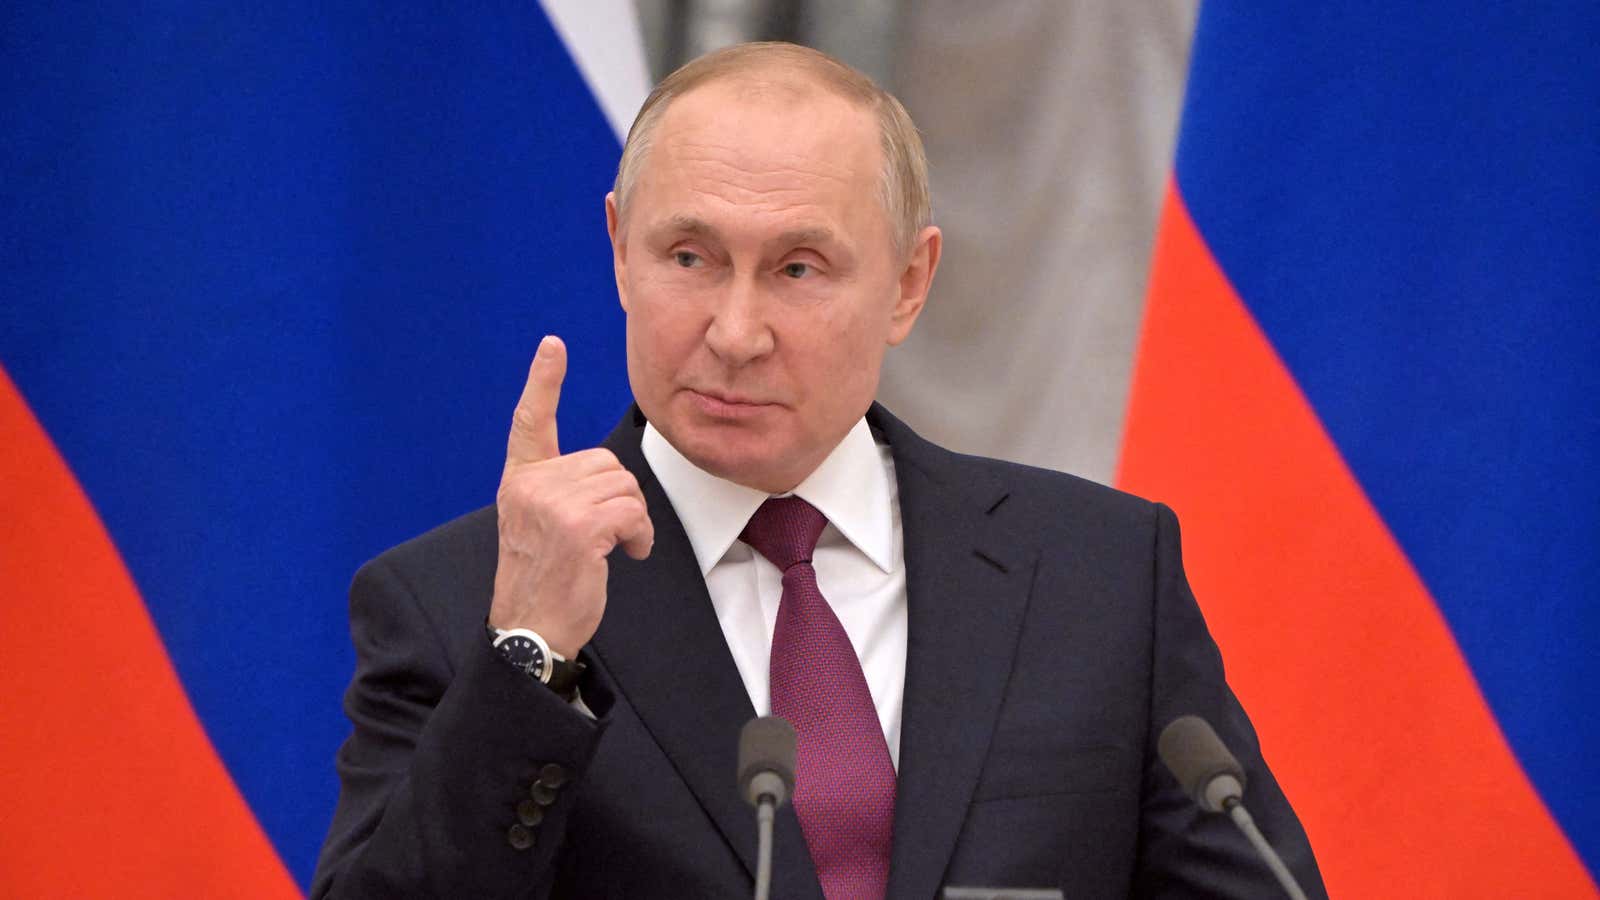 Russian president Vladimir Putin stands at a podium while raising the index finger on his right hand. Two Russian flags are displayed behind him.